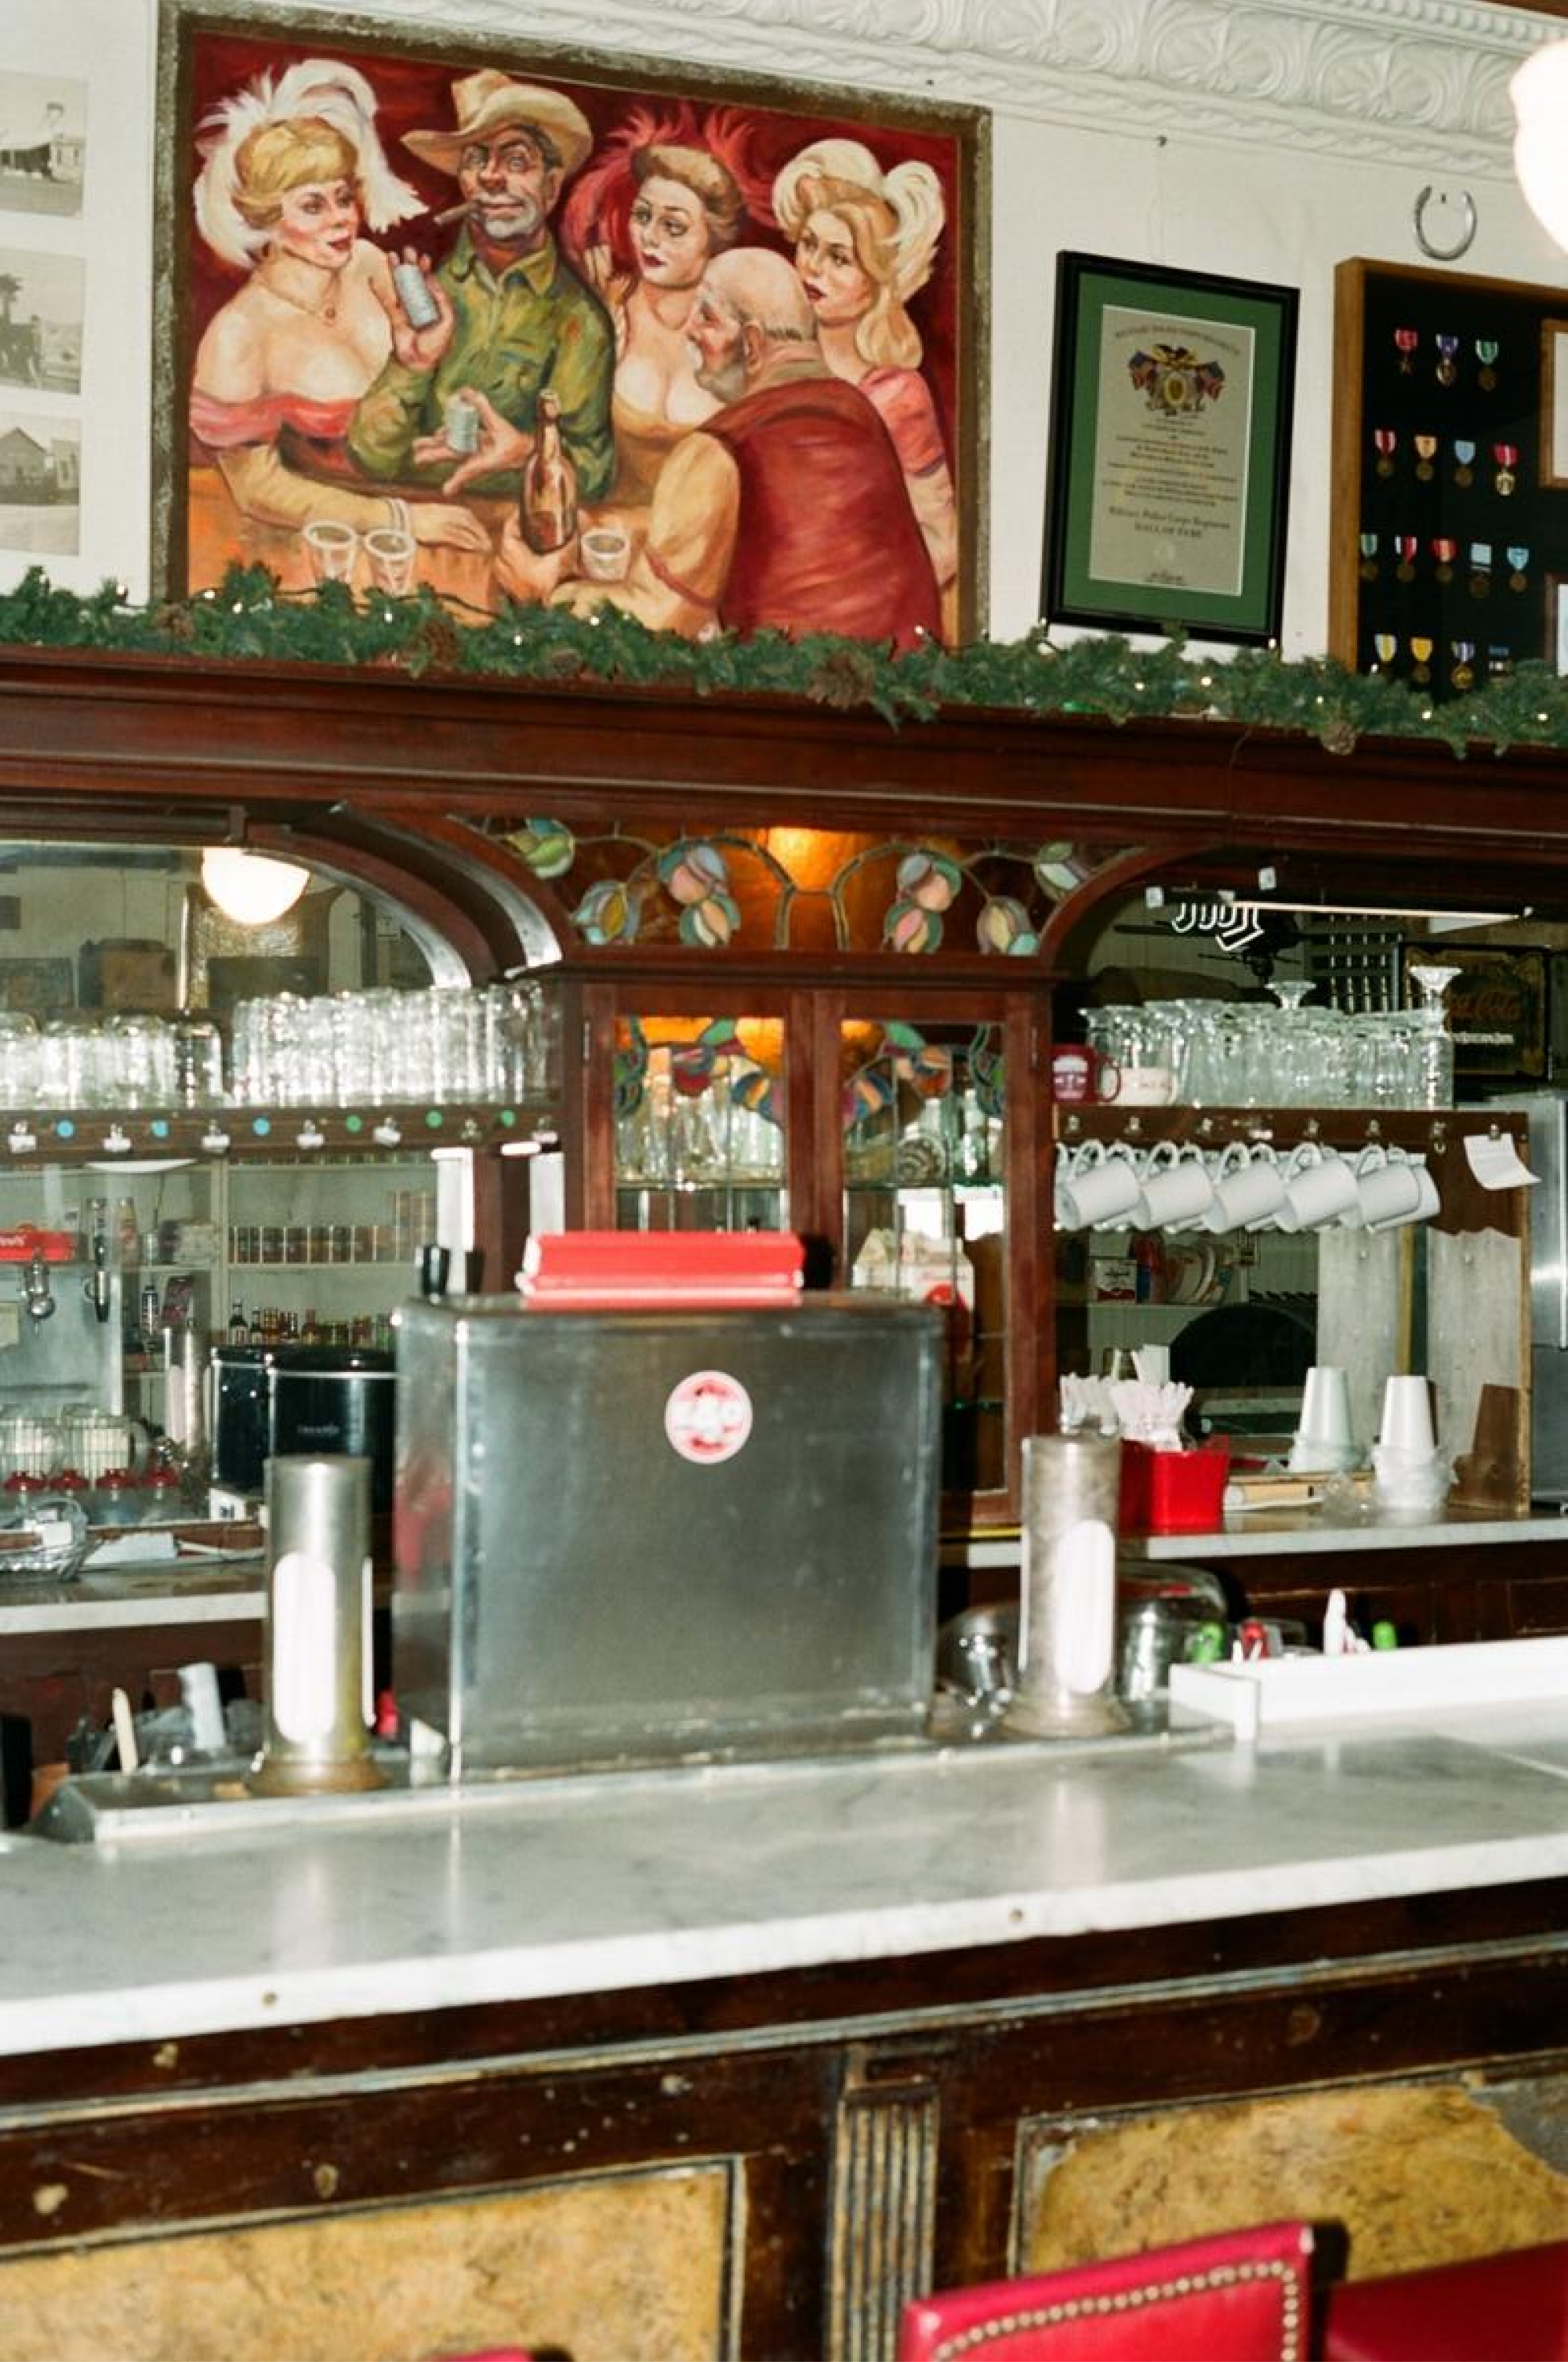 A marble counter top bar, with a soda dispenser on top and mugs hanging above.